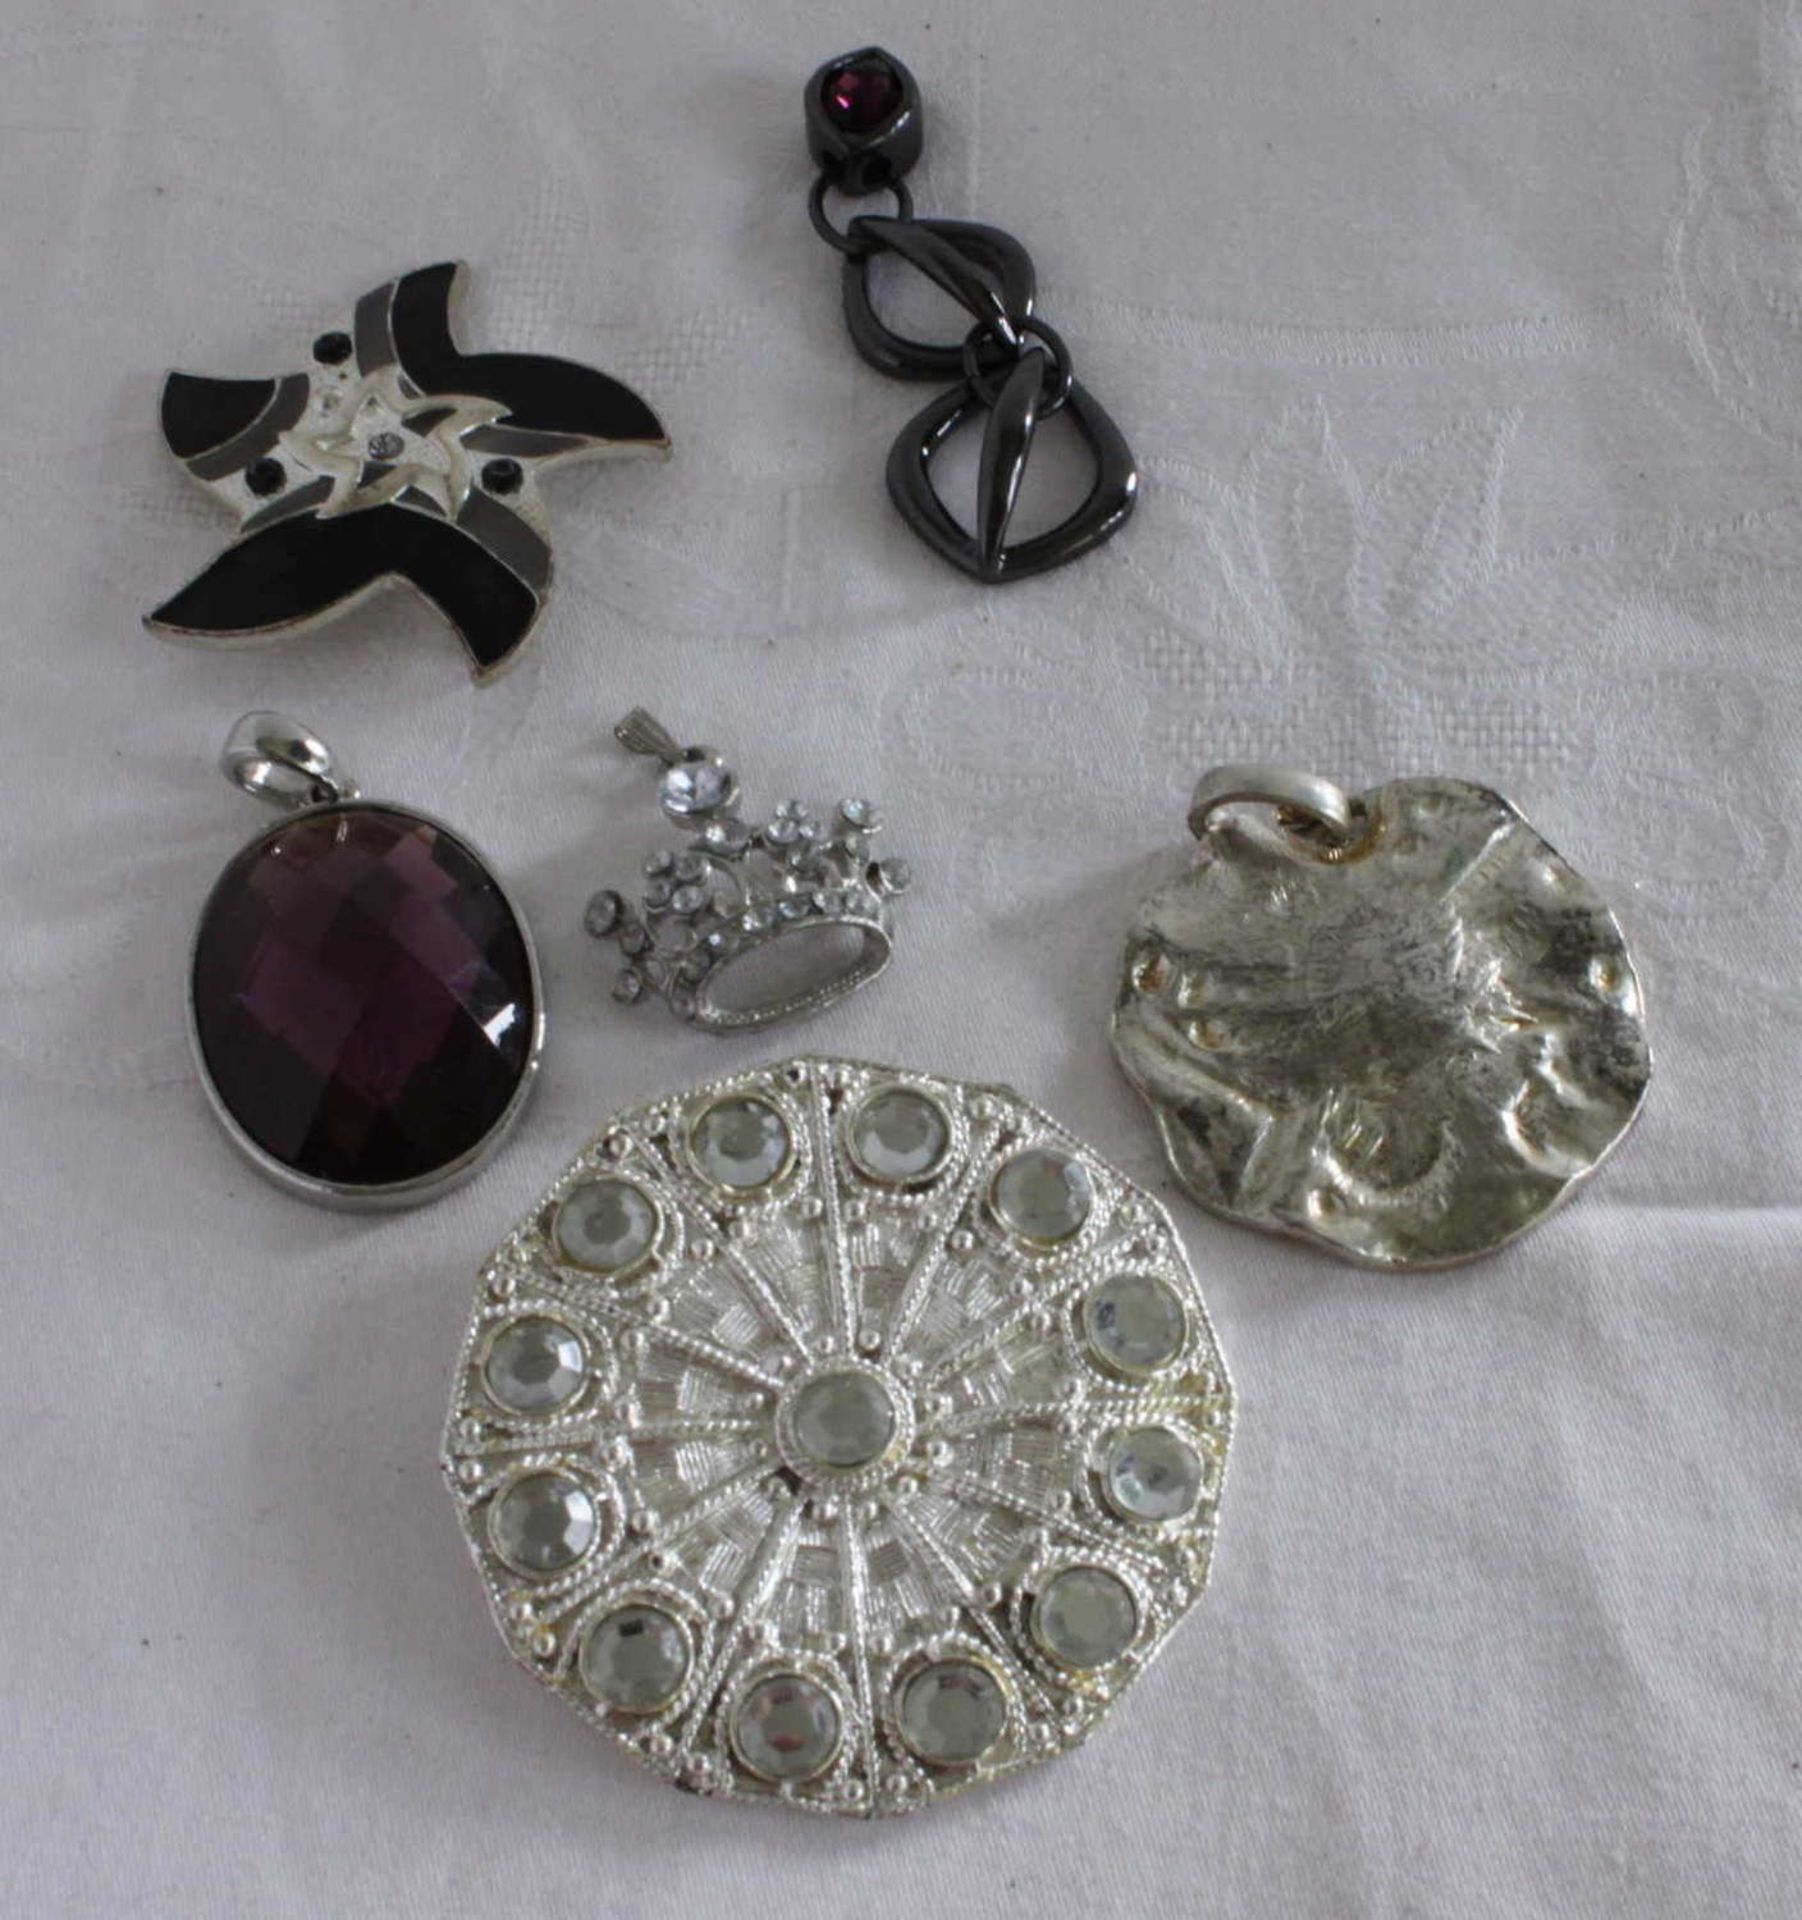 Lot of modern costume jewelry, pendants, etc. Please have a look!